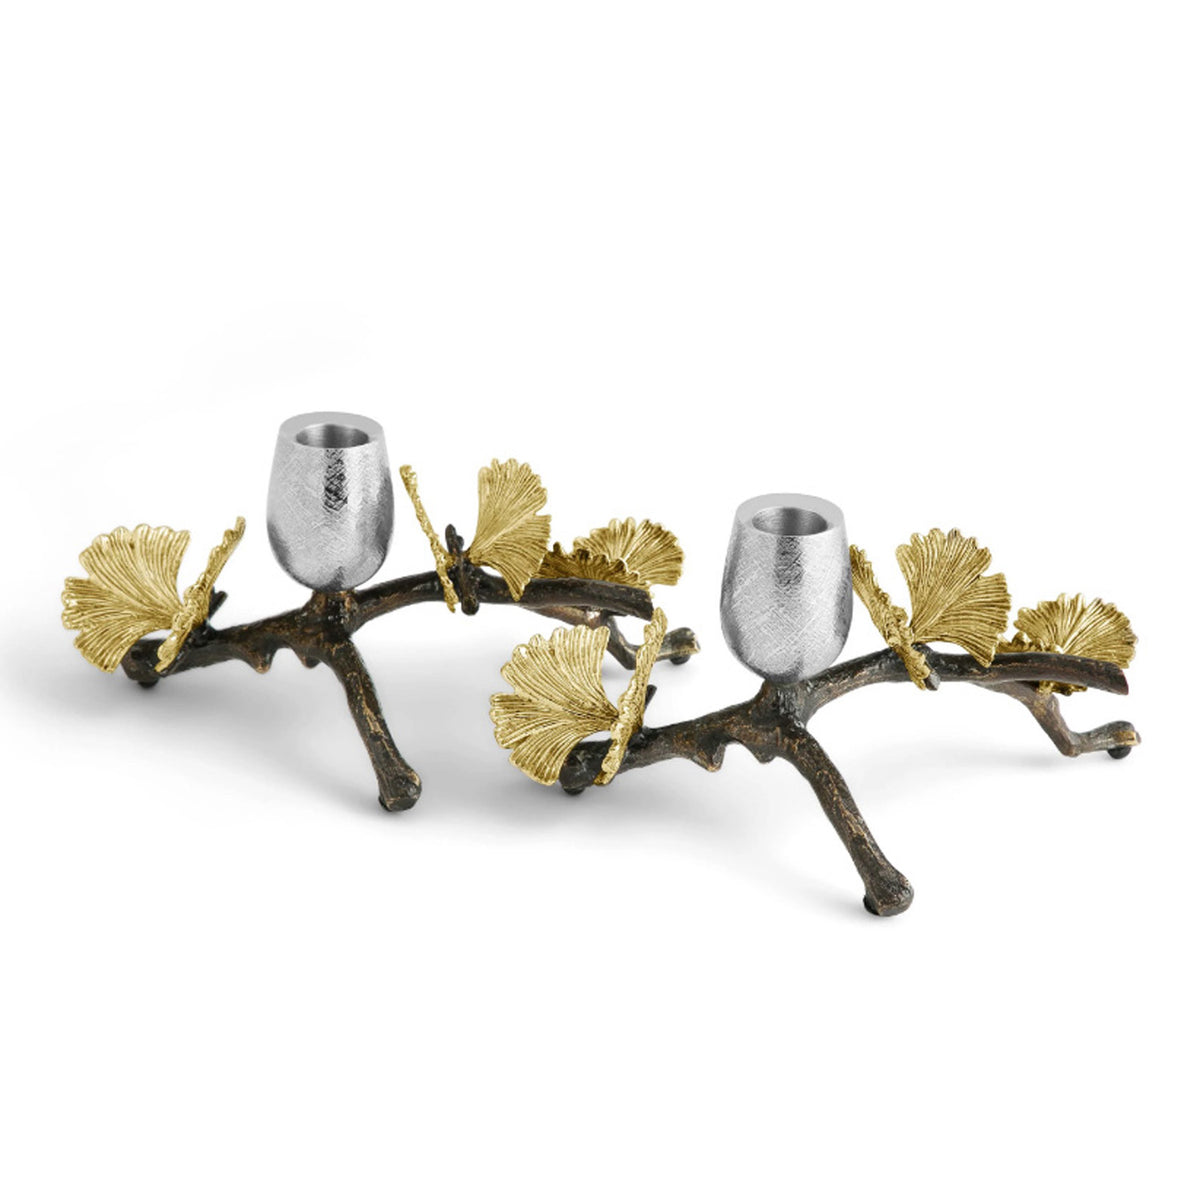 Michael Aram - Butterfly Ginkgo Low Candle Holders